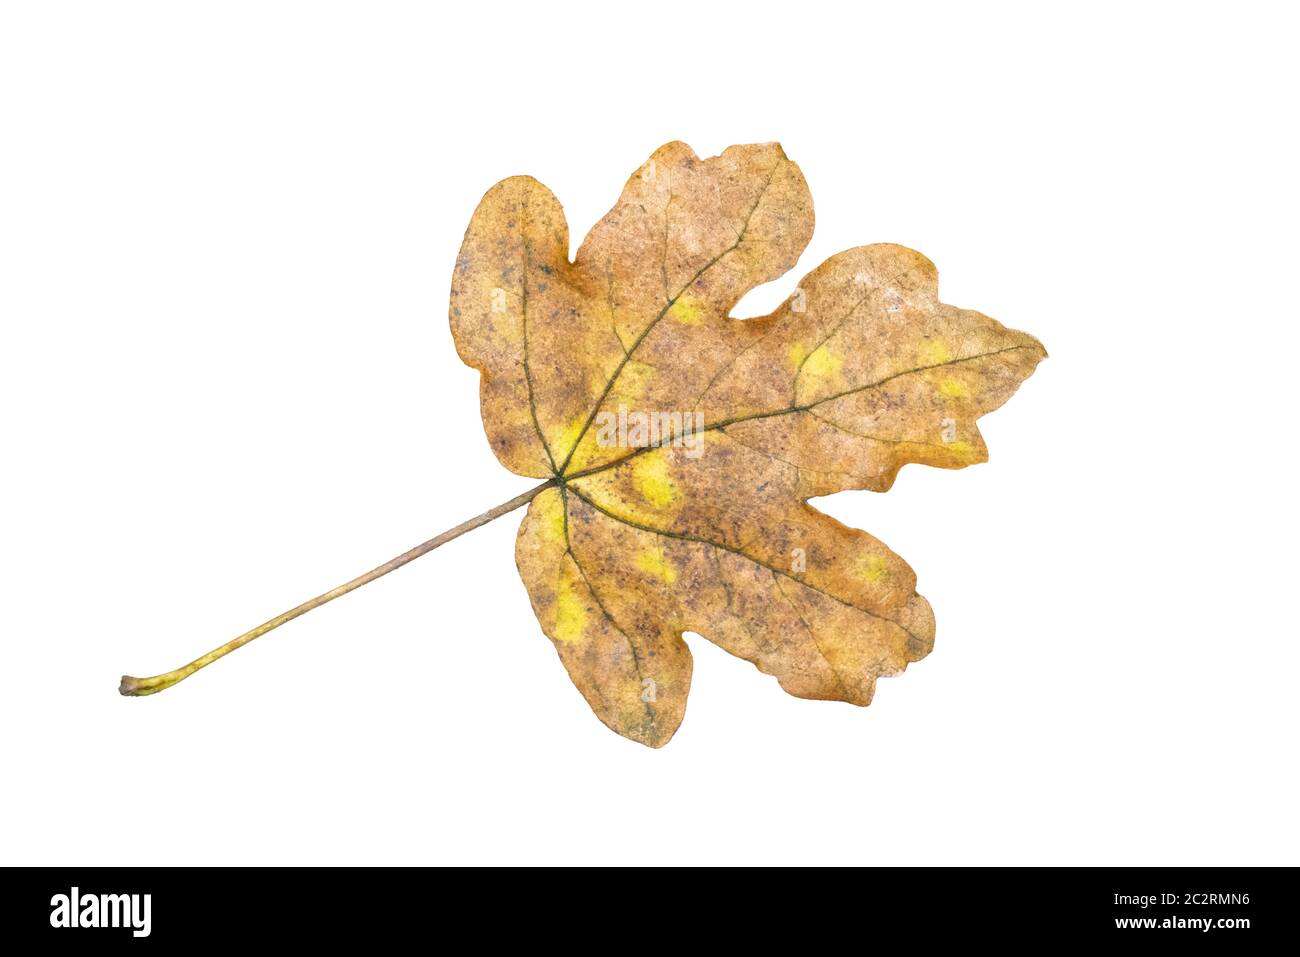 Leaf in autumn fall color cut out and isolated on a white background Stock Photo